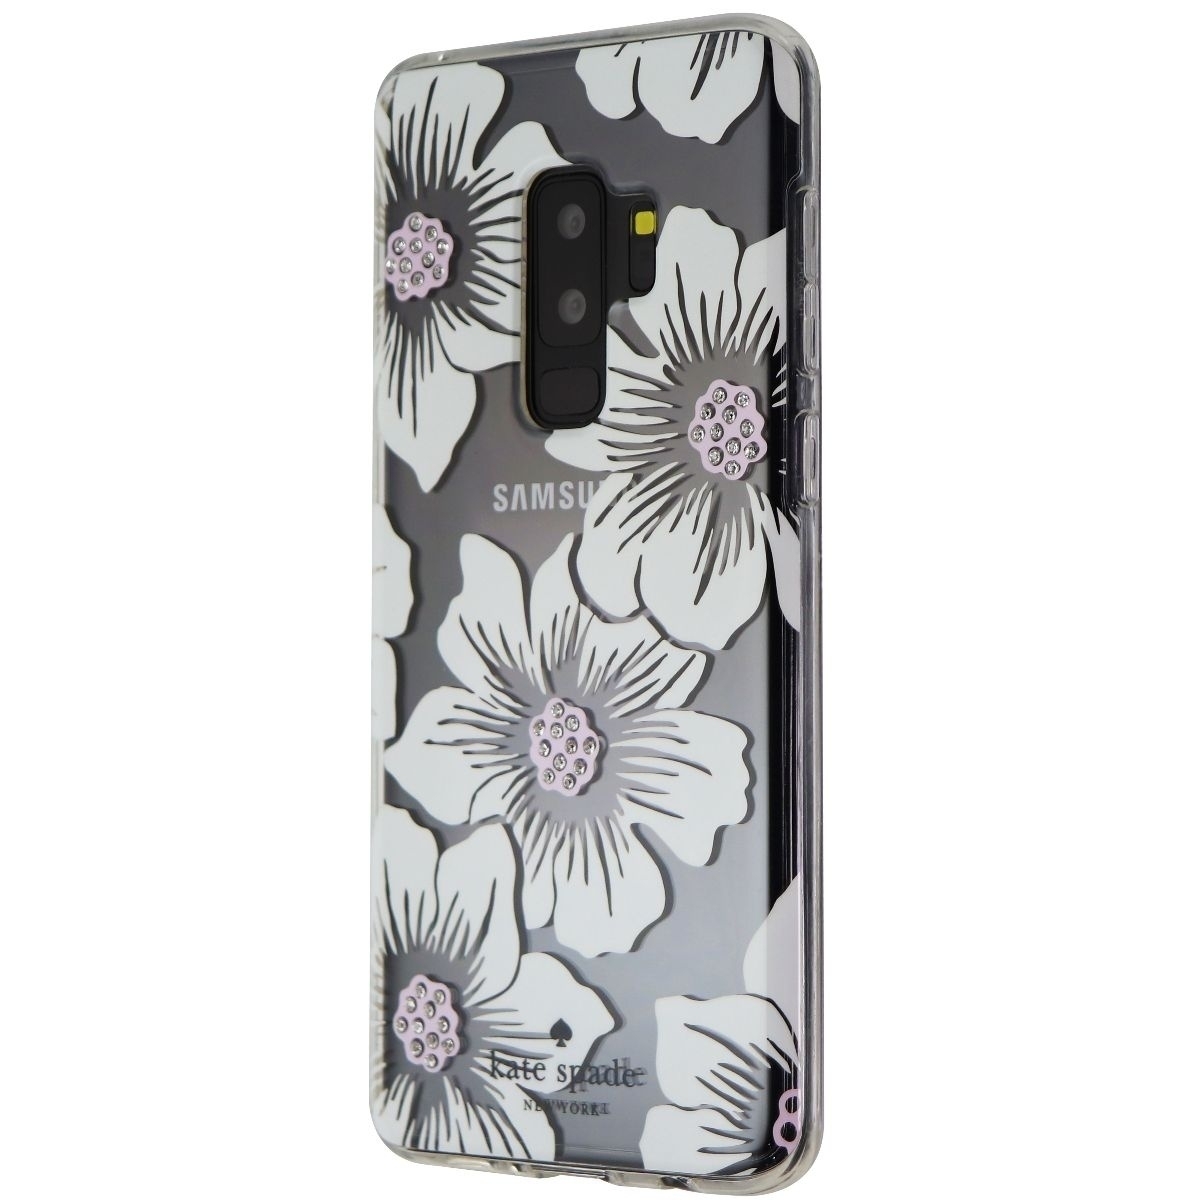 Kate Spade Hard Case For Samsung Galaxy S9+ (Plus) - Clear/White Flower/Gems